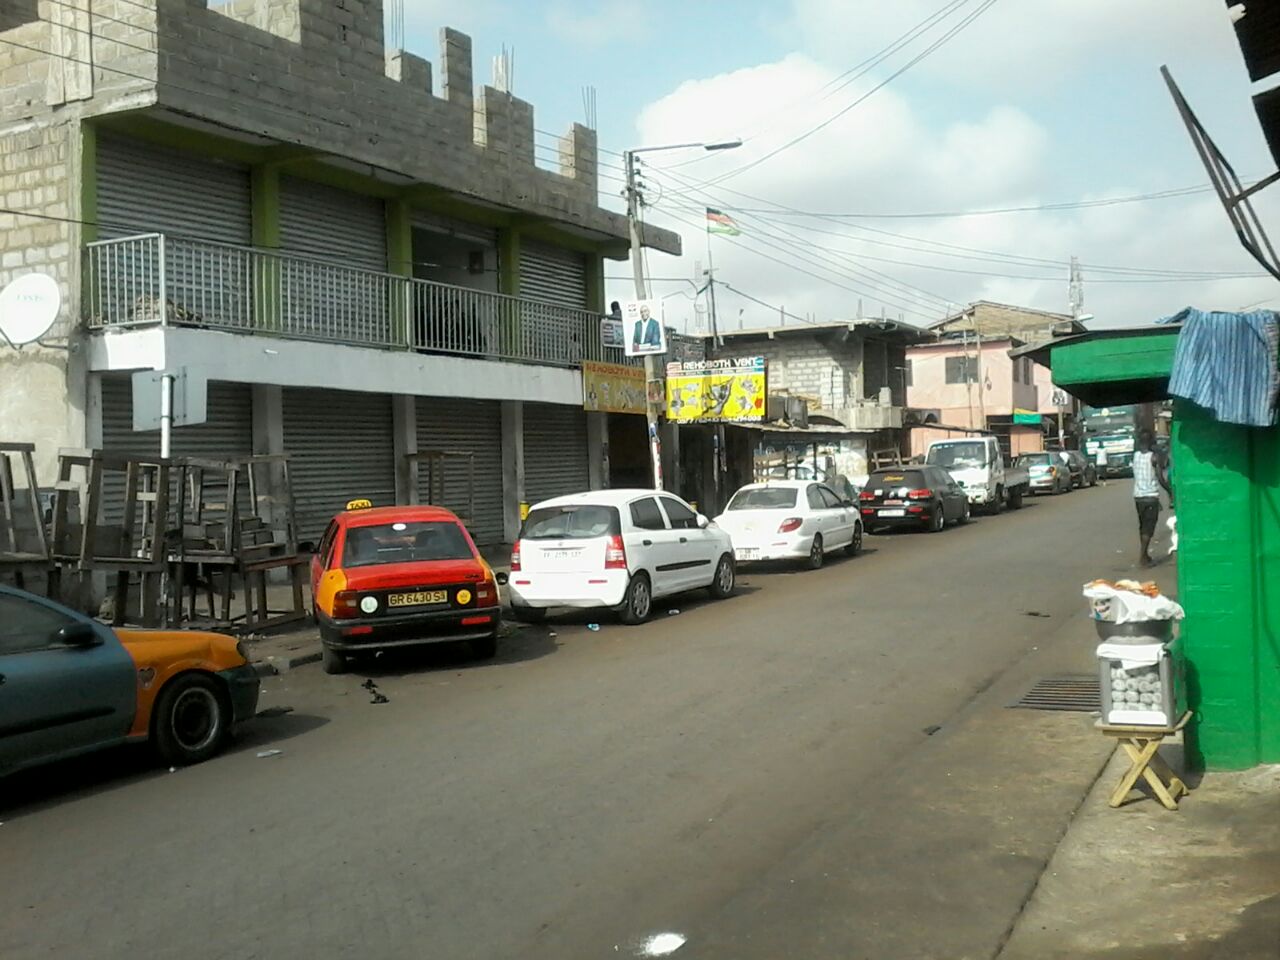 #GhanaVotes: Business District streets deserted 